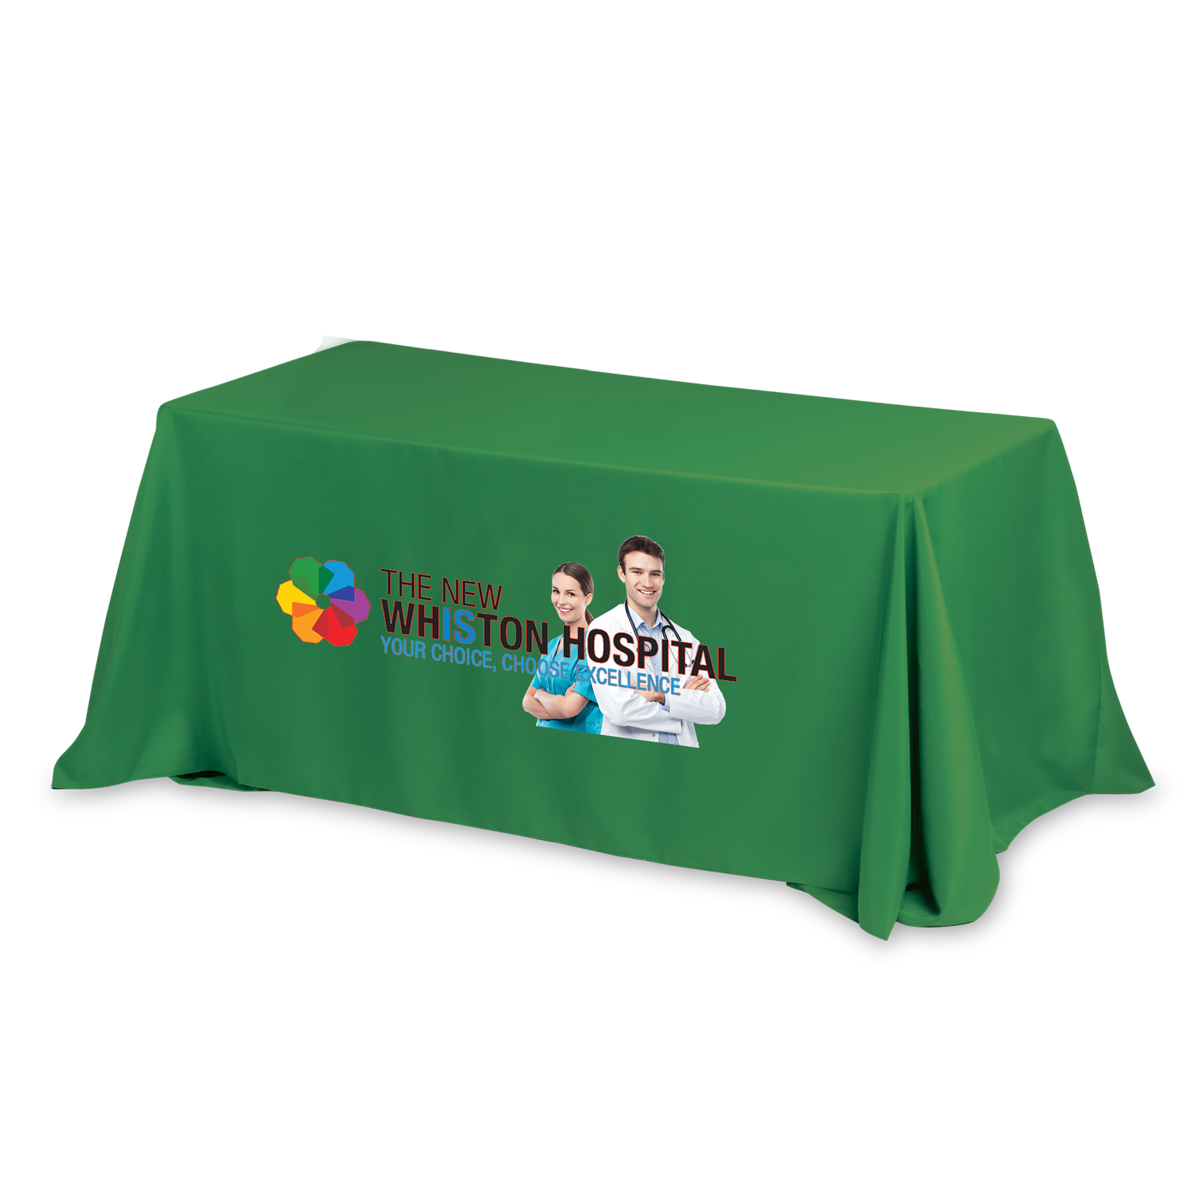 "PREAKNESS EIGHT" 3-Sided Economy 8 ft Table Cloth & Covers (PhotoImage Full Color) / Fits 8 ft Table